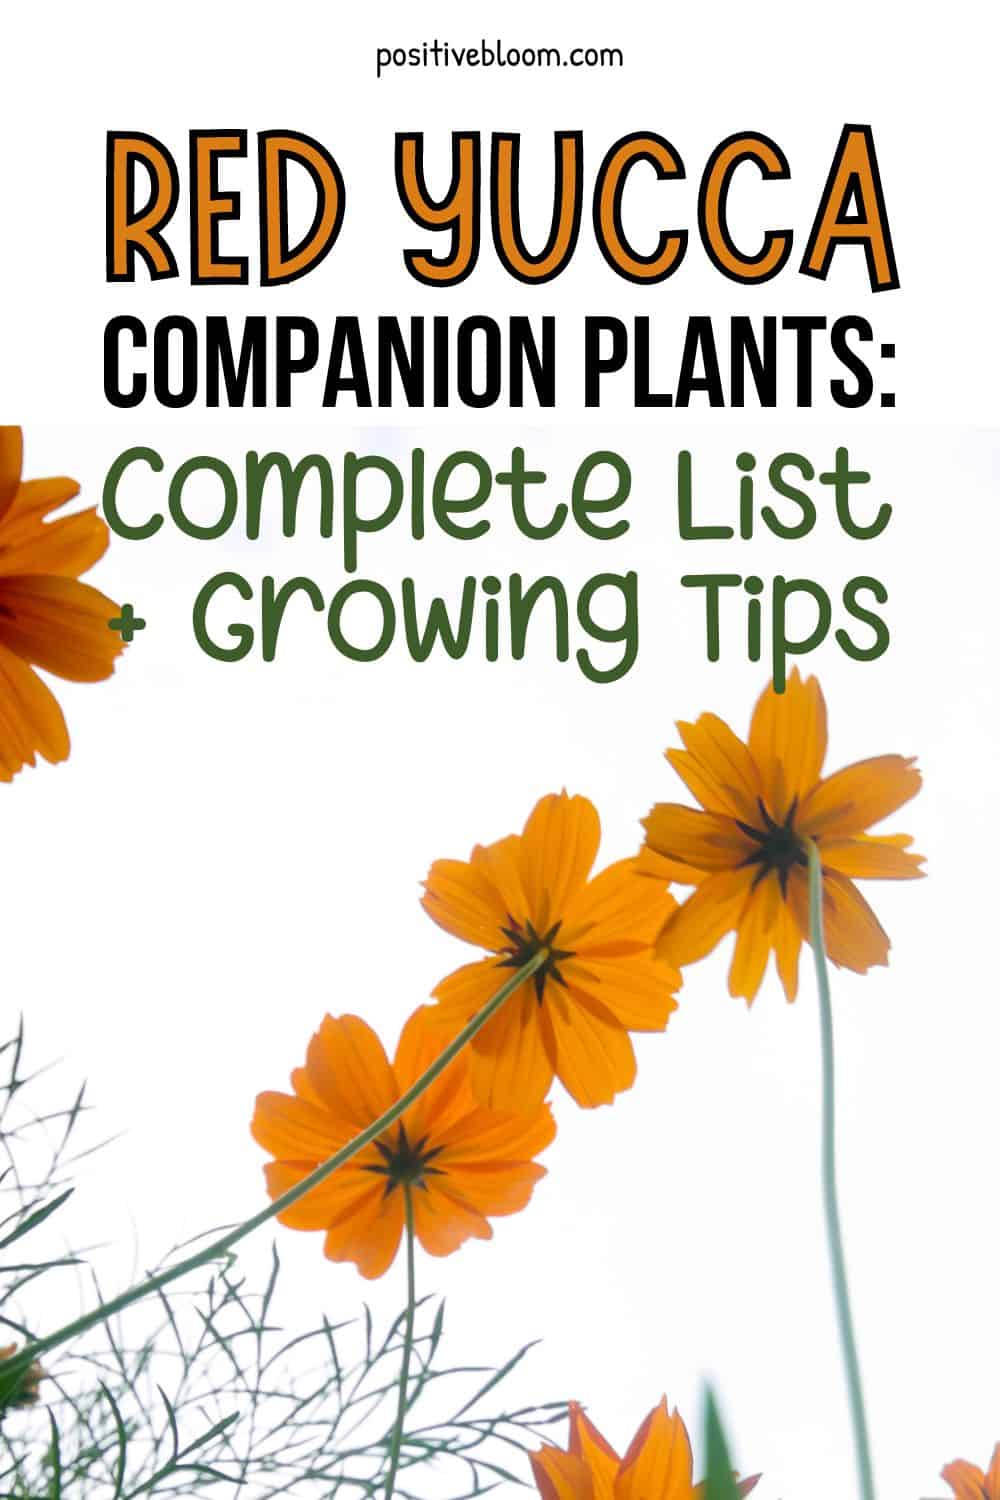 Red Yucca Companion Plants Complete List + Growing Tips Pinterest